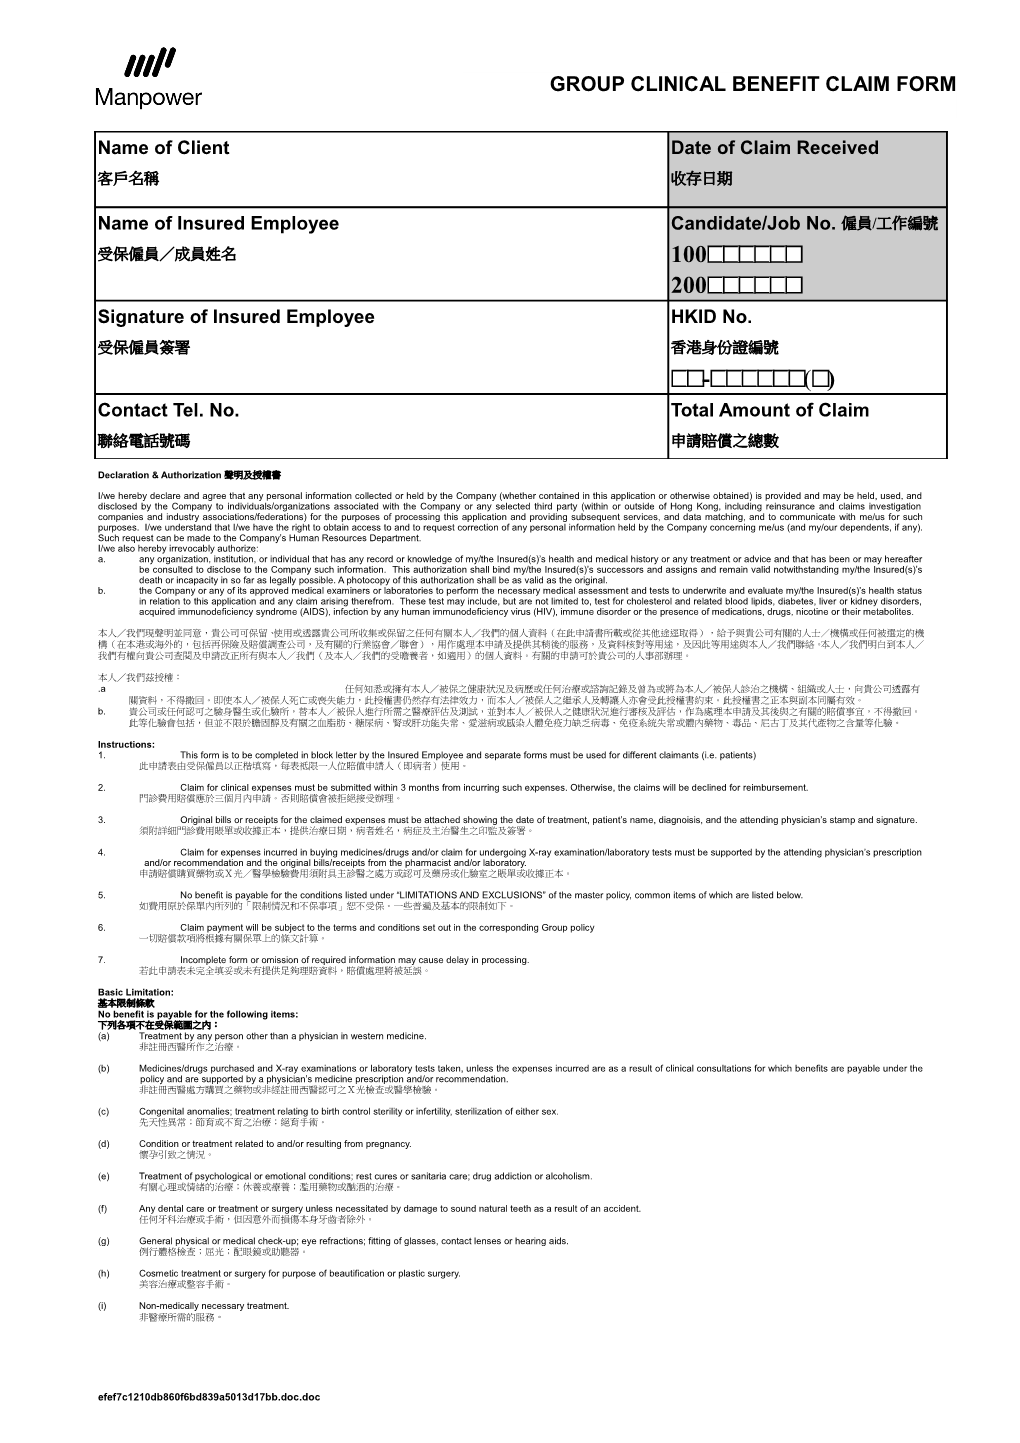 Group Clinical Benefit Claim Form